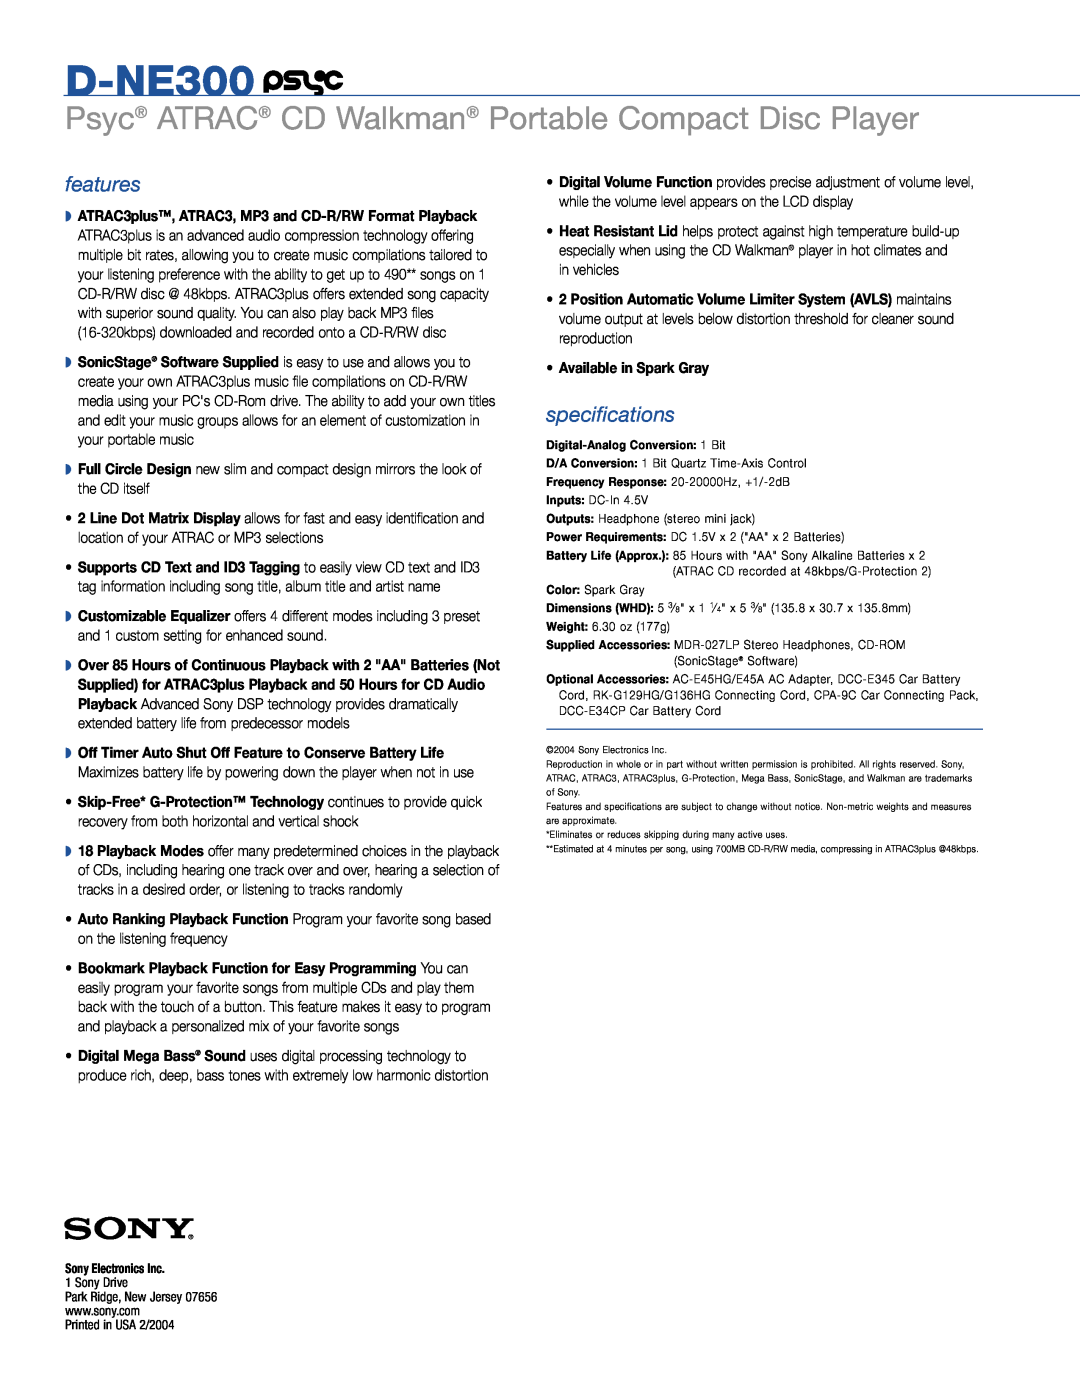 Sony D-NE300 manual features, specifications 